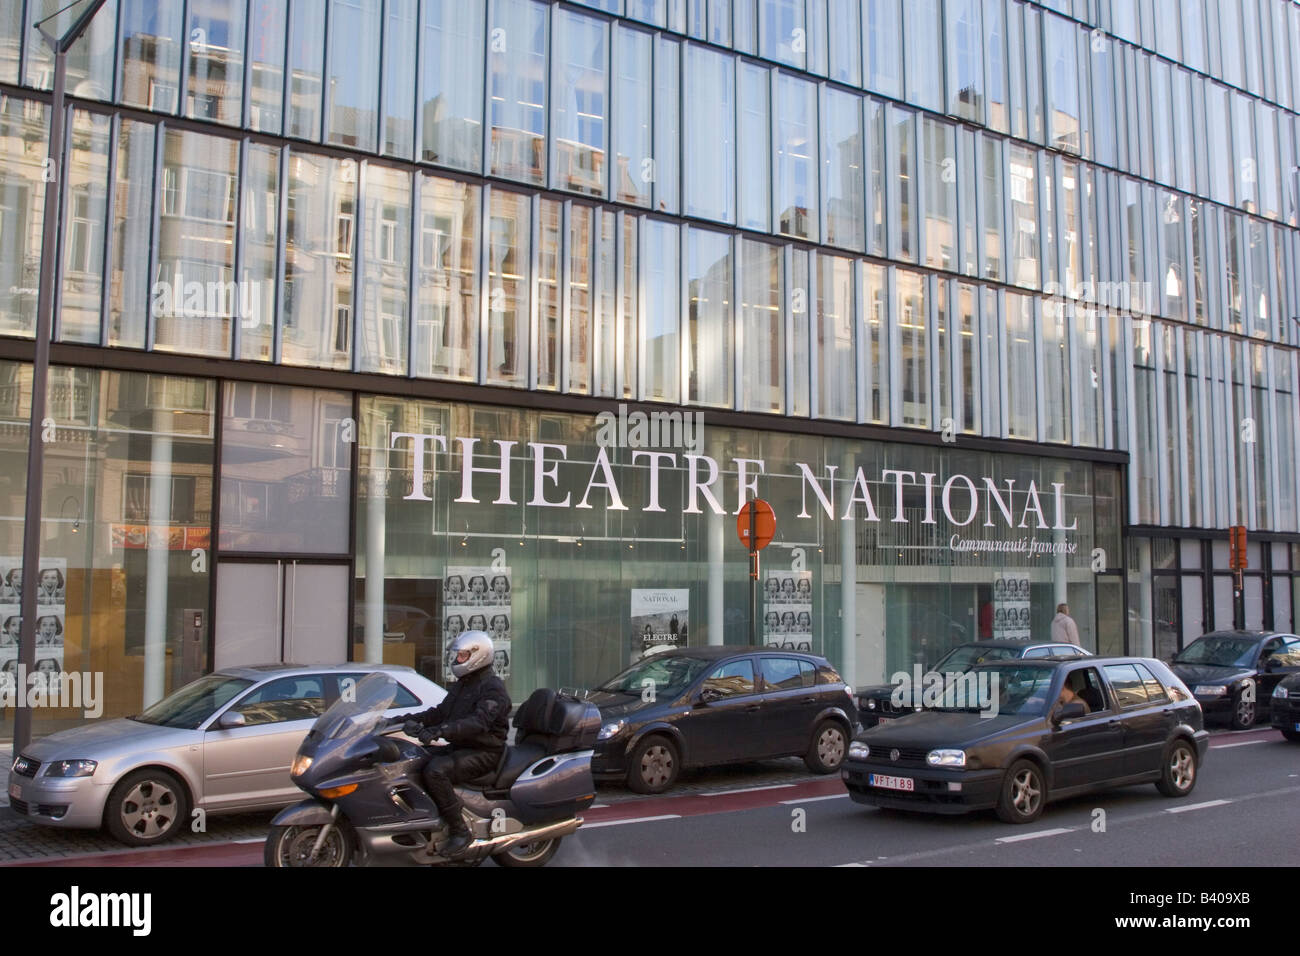 Theatre National, 111-115 boulevard Emile Jacqmain, Lower Town, Brussels Belgium Stock Photo